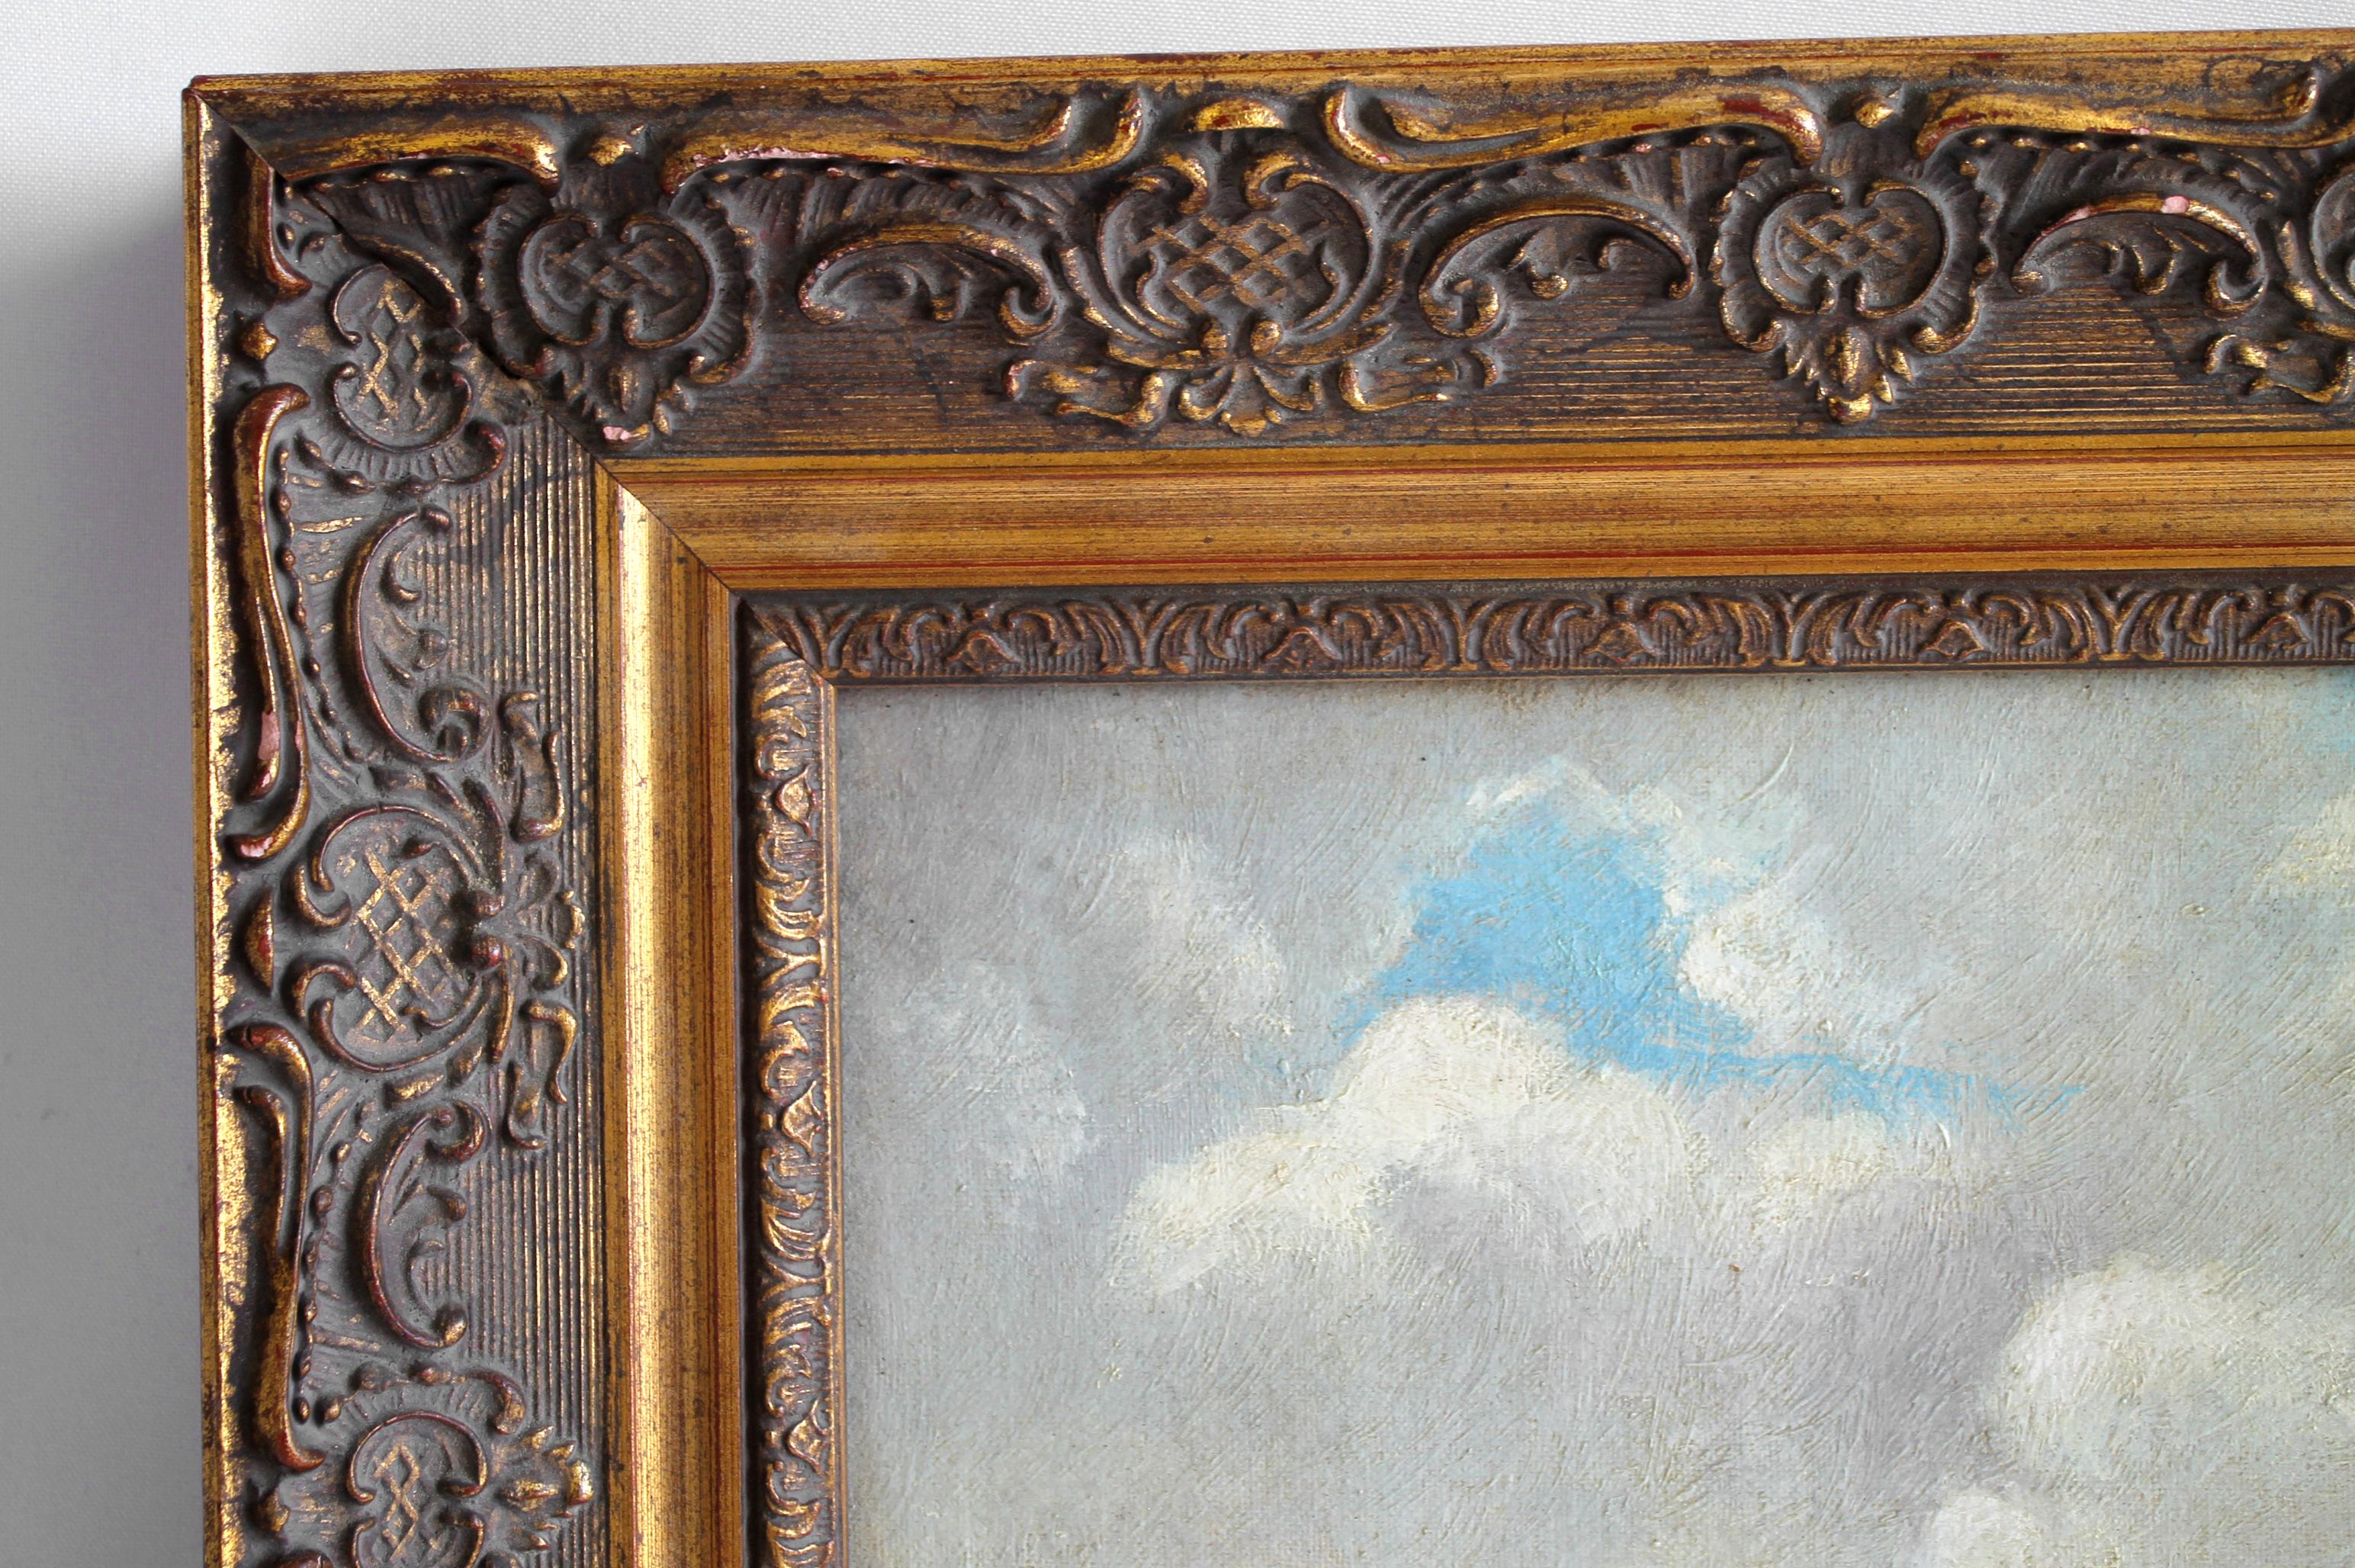 European oil painting by Burdett Mason
A scene in Holland, with a soft pale blue cloudy sky, boats floating on the water, and windmills in the distance. Set in a beautiful antique gold washed frame. Ready to hang.
Measures: 16